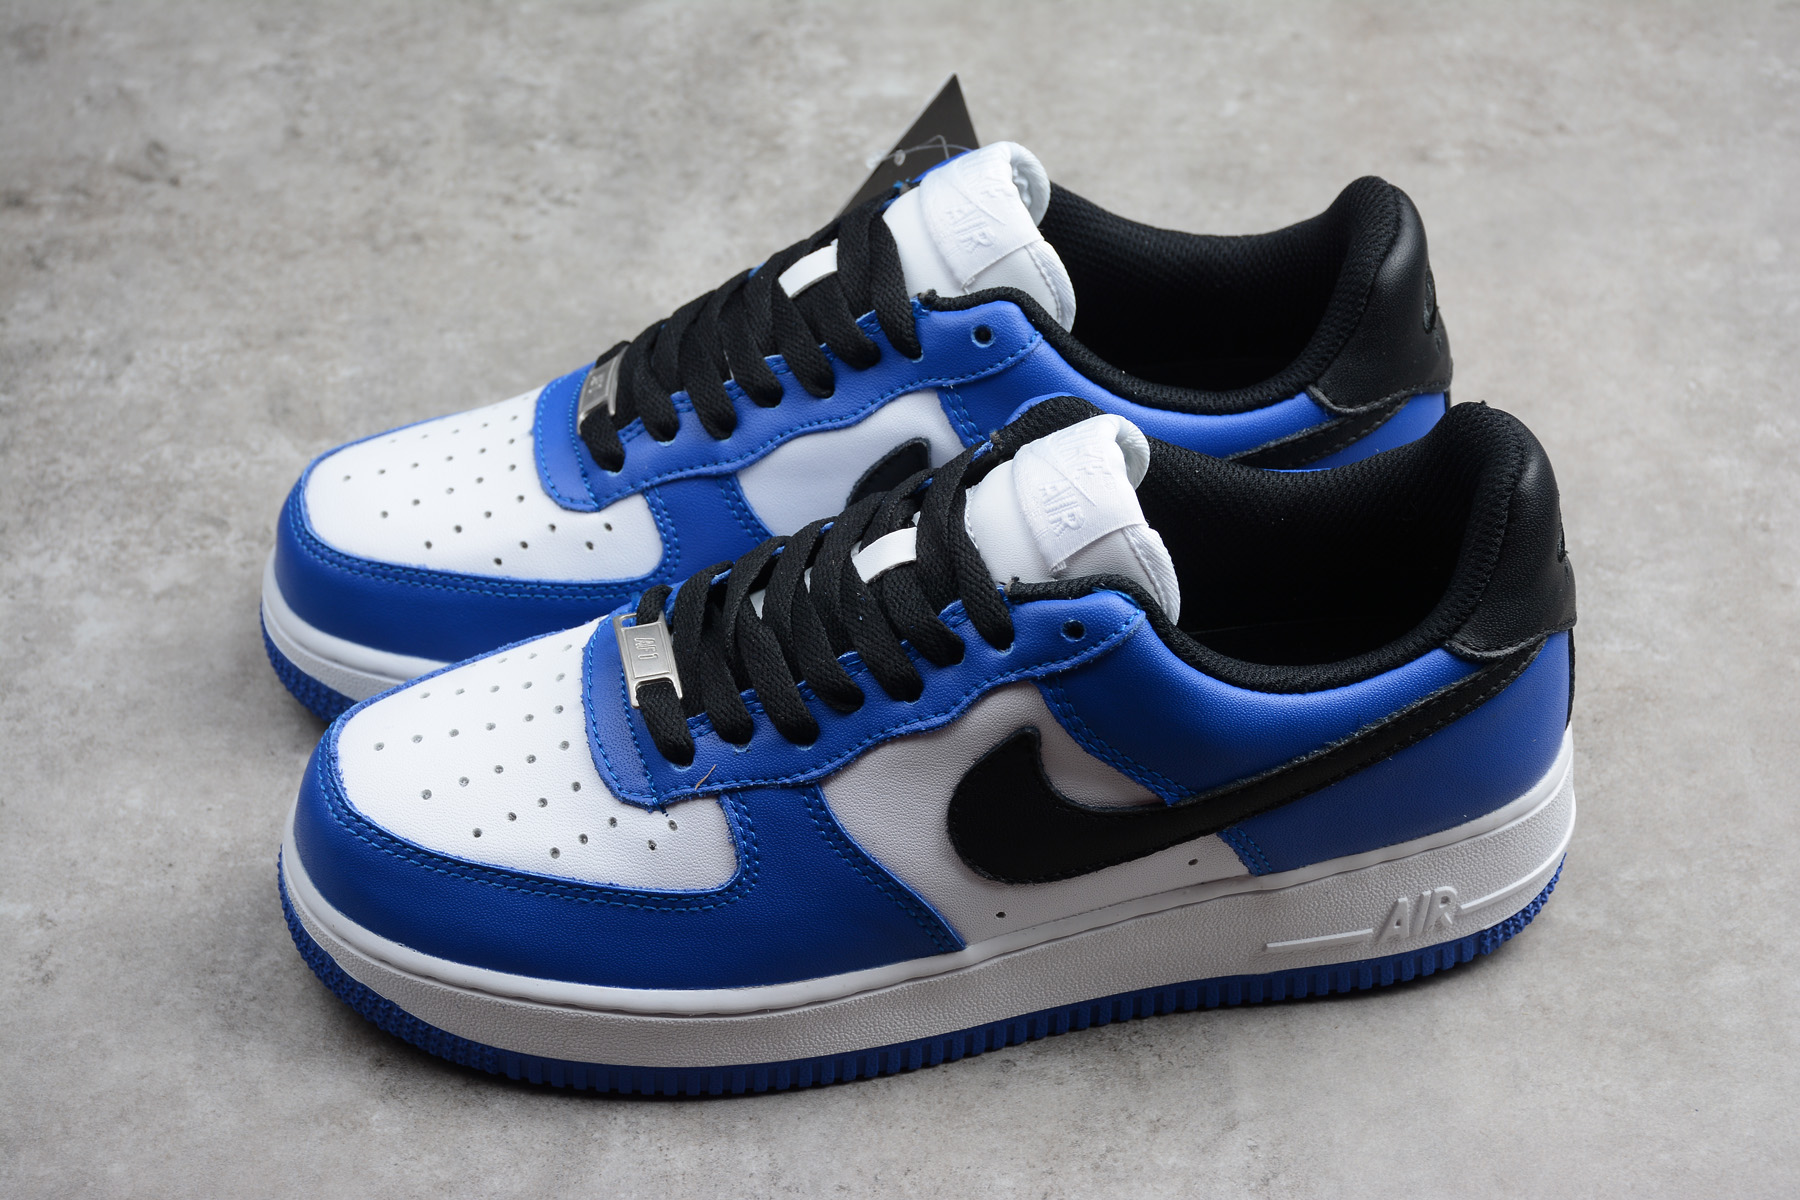 Men's Nike Air Force 1 Low “Sapphire Blue” On Sale